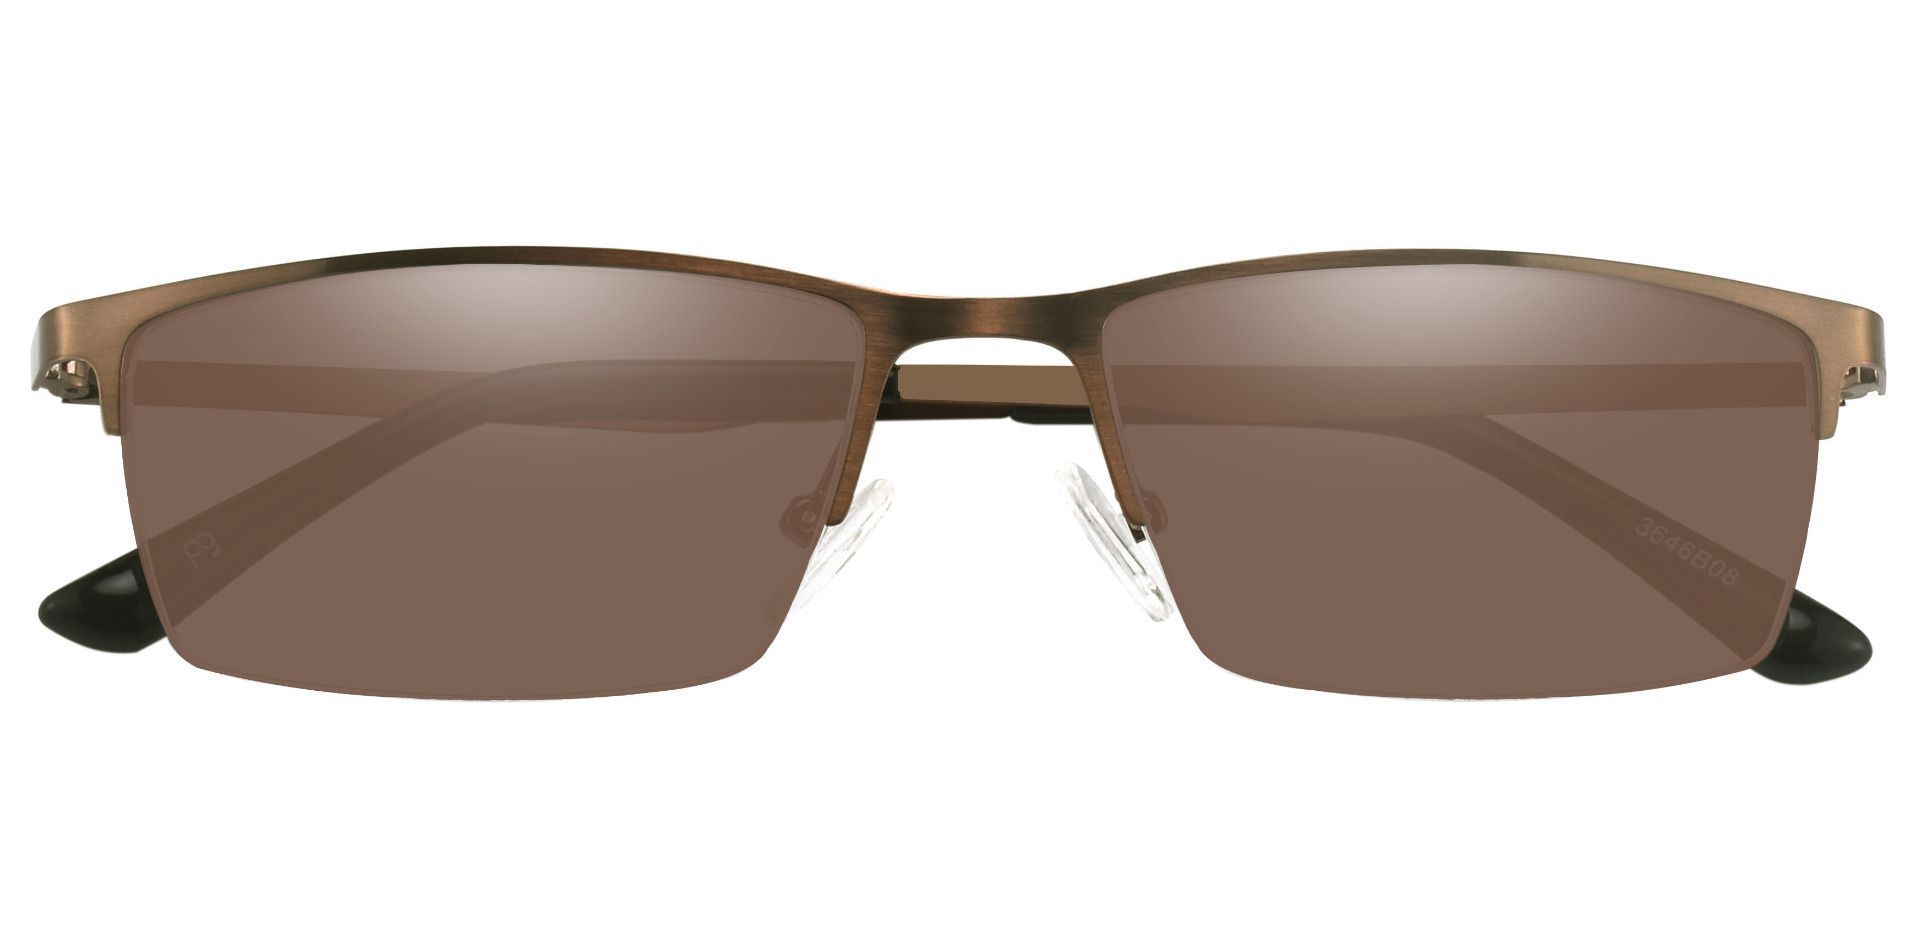 Lombard Rectangle Prescription Sunglasses - Brown Frame With Brown Lenses